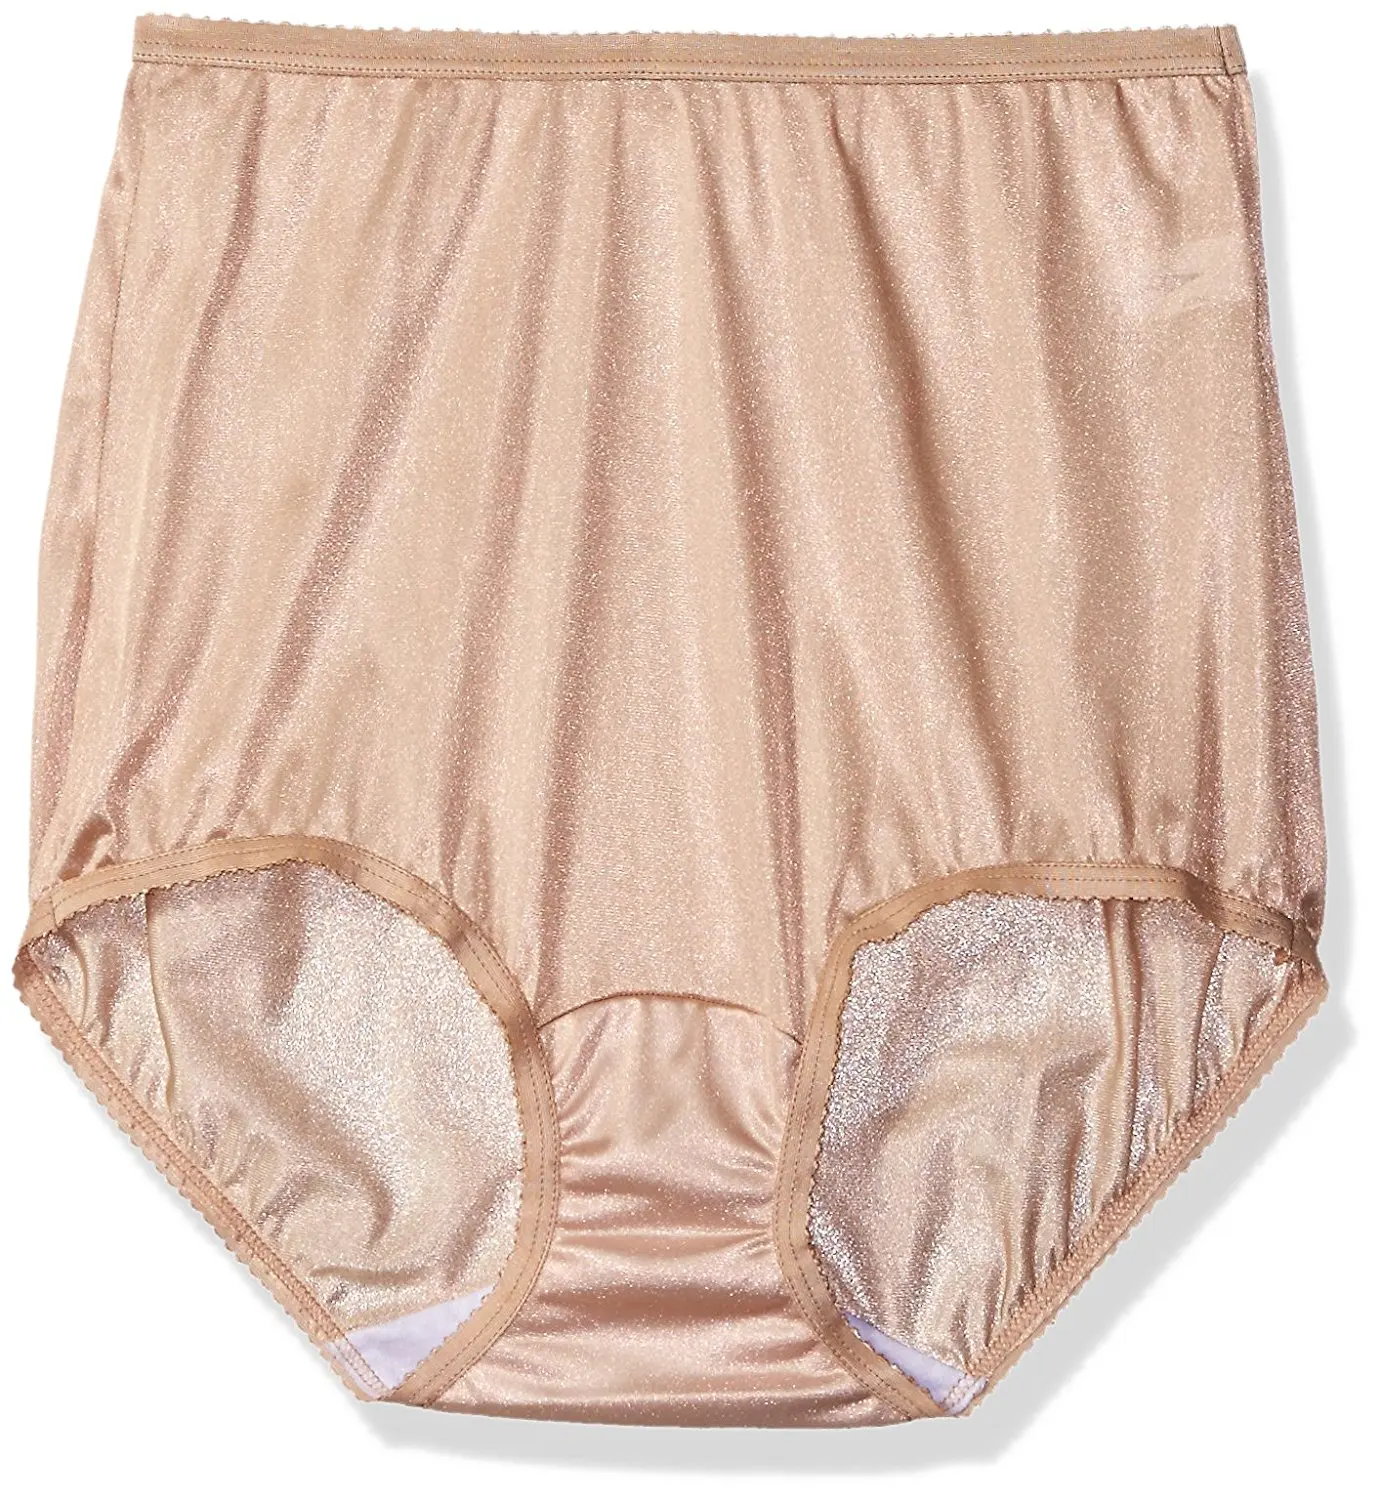 Cheap Shadowline Panties Find Shadowline Panties Deals On Line At 